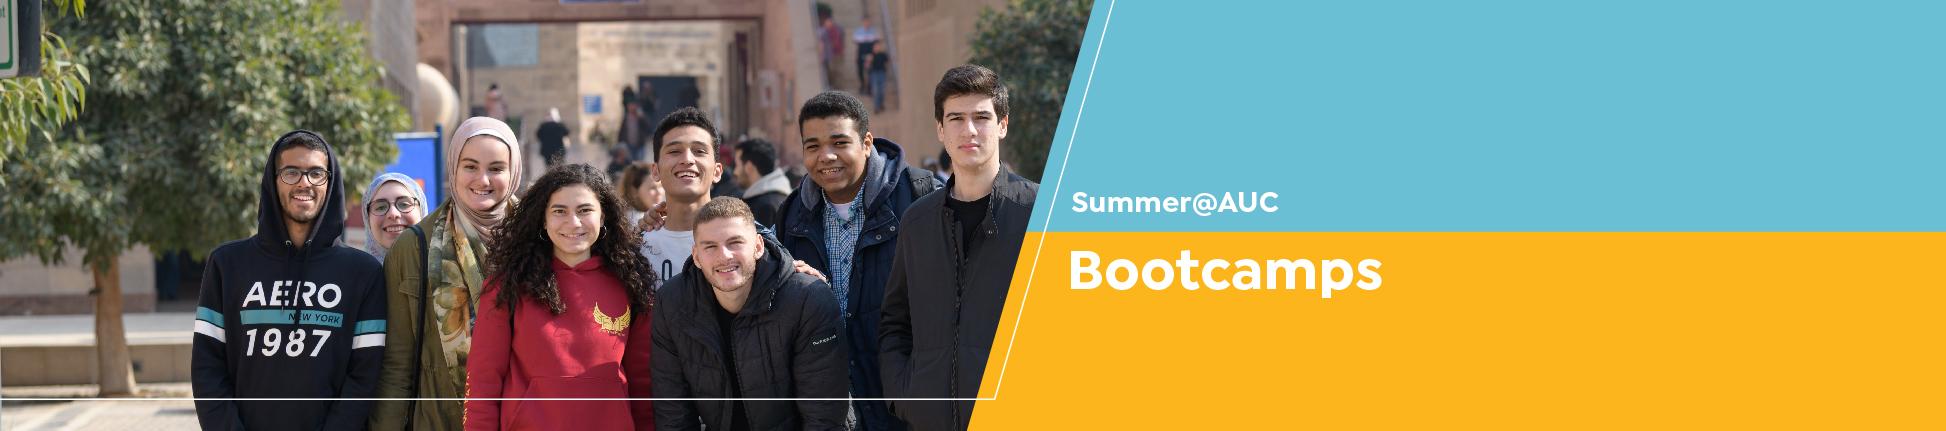 AUC Summer Program for Visiting Students, Summer@AUC Bootcamps